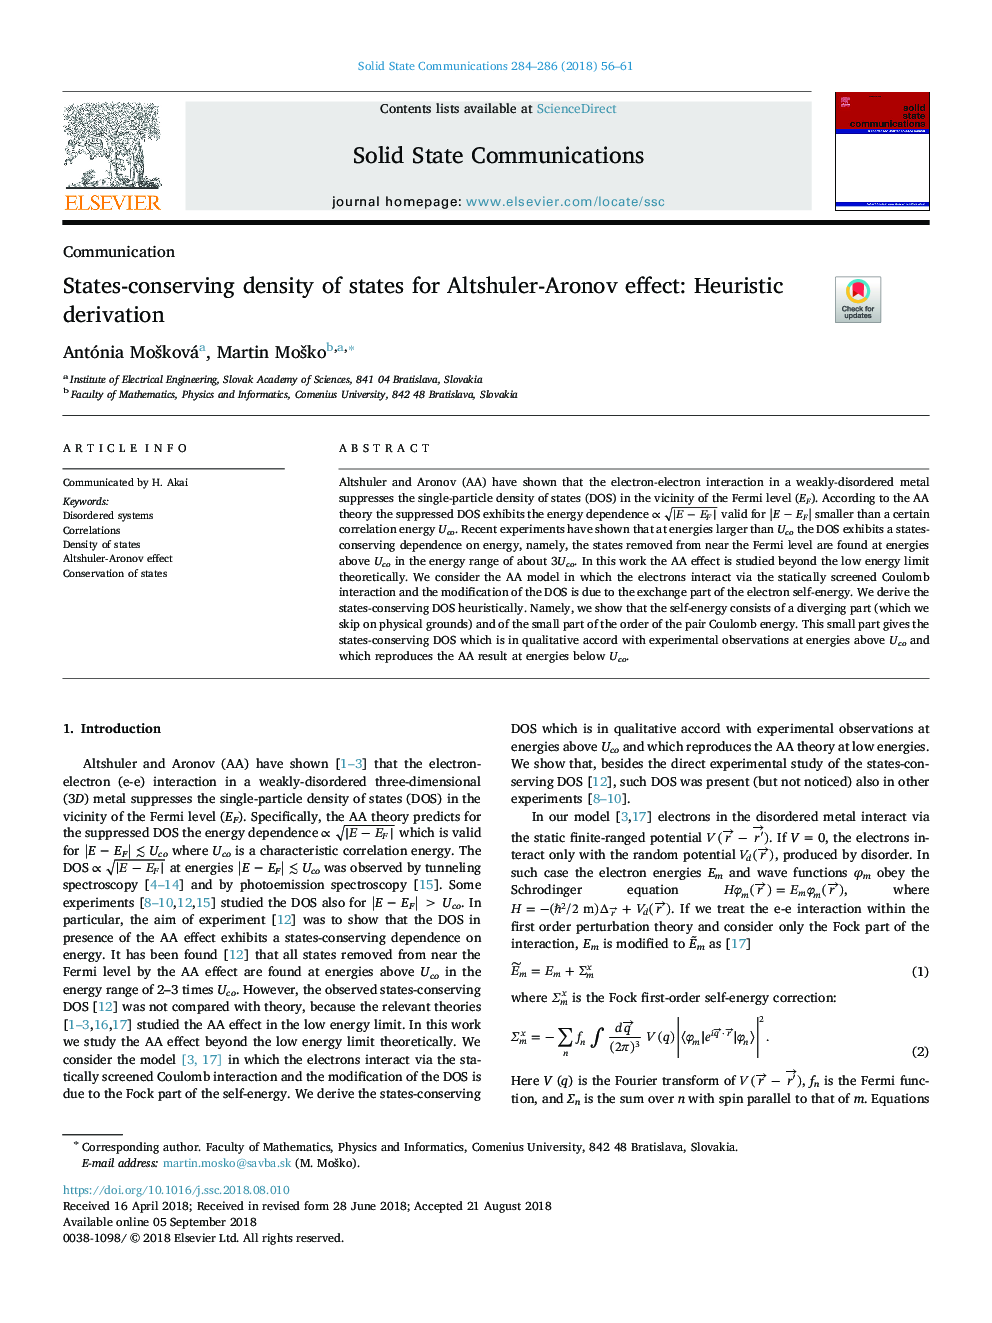 States-conserving density of states for Altshuler-Aronov effect: Heuristic derivation